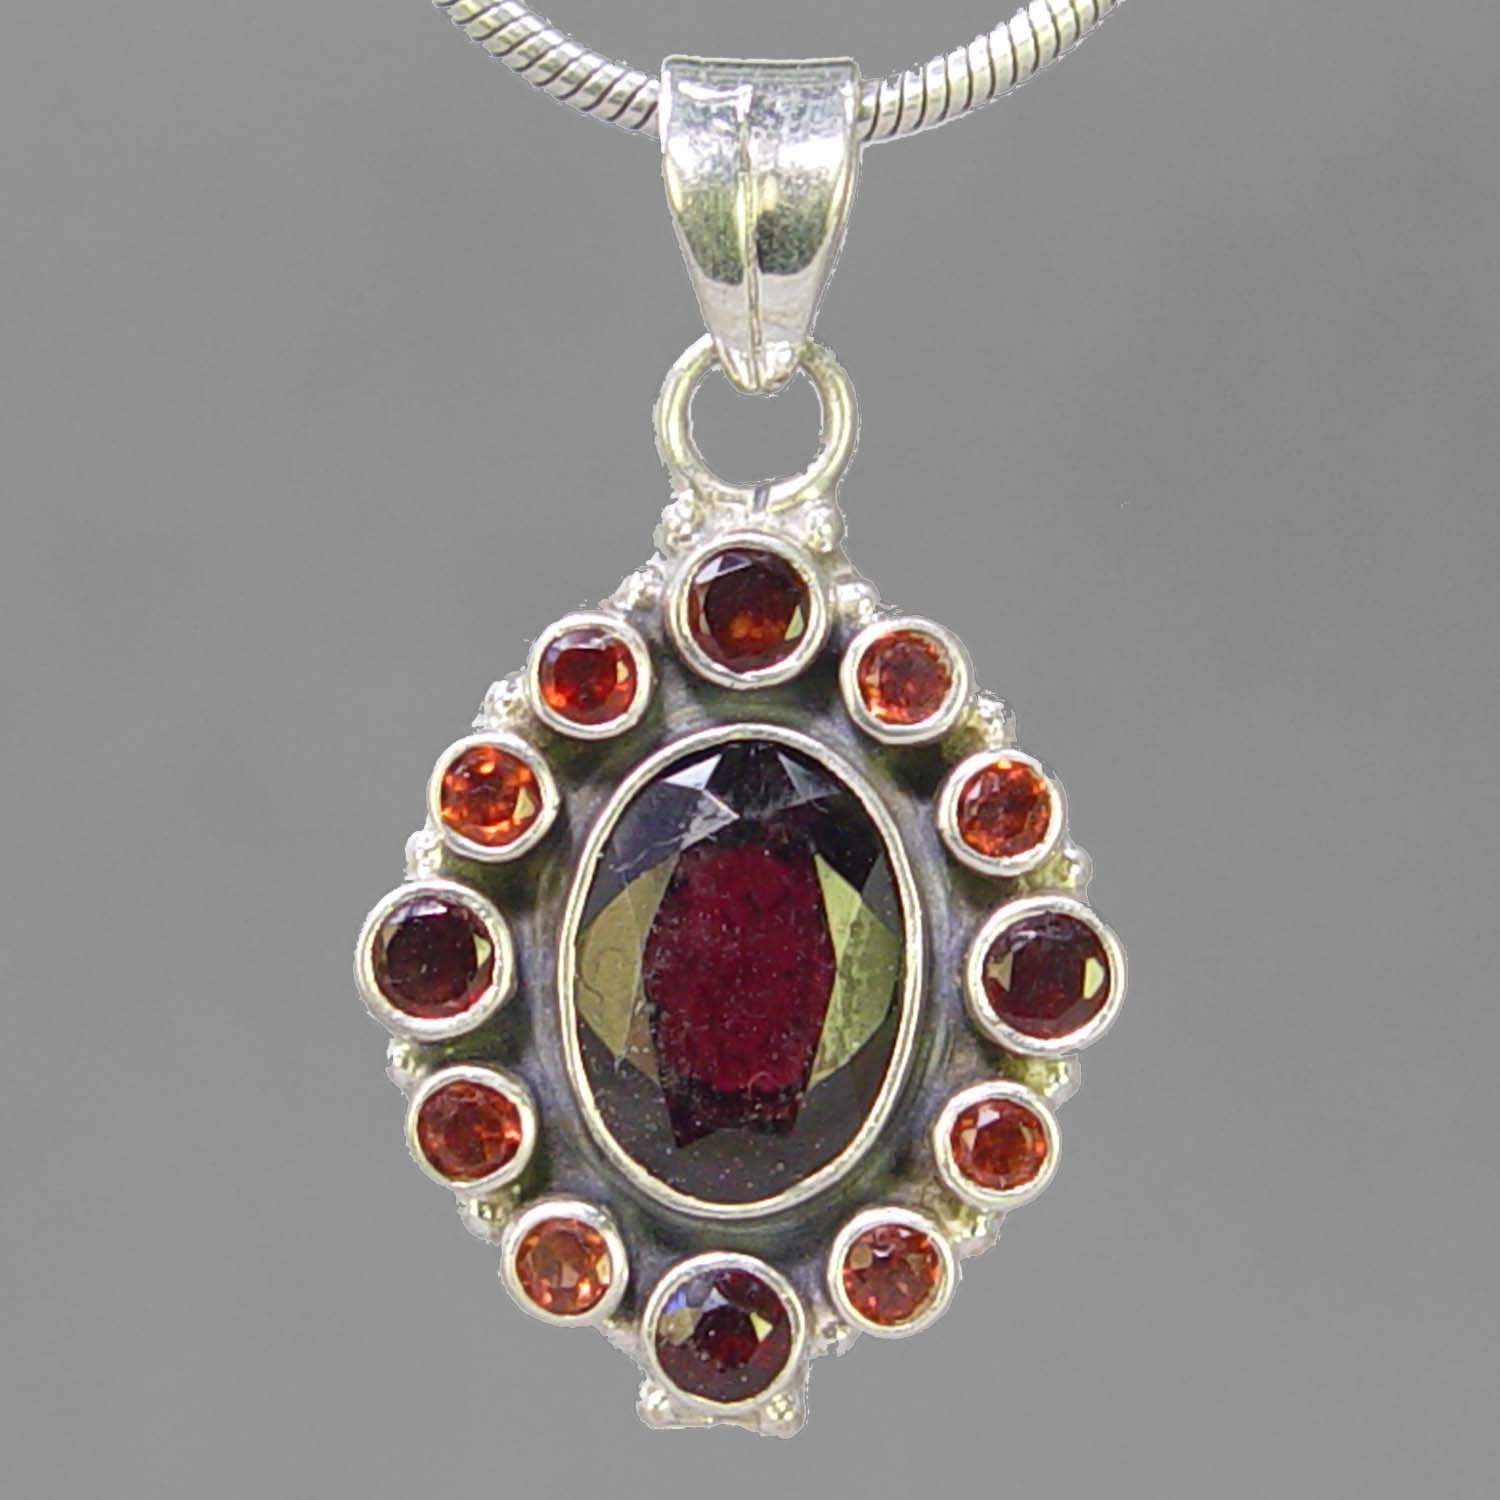 Hessonite Garnet 8 ct Faceted Oval with 12 Side Stones Sterling Silver Pendant